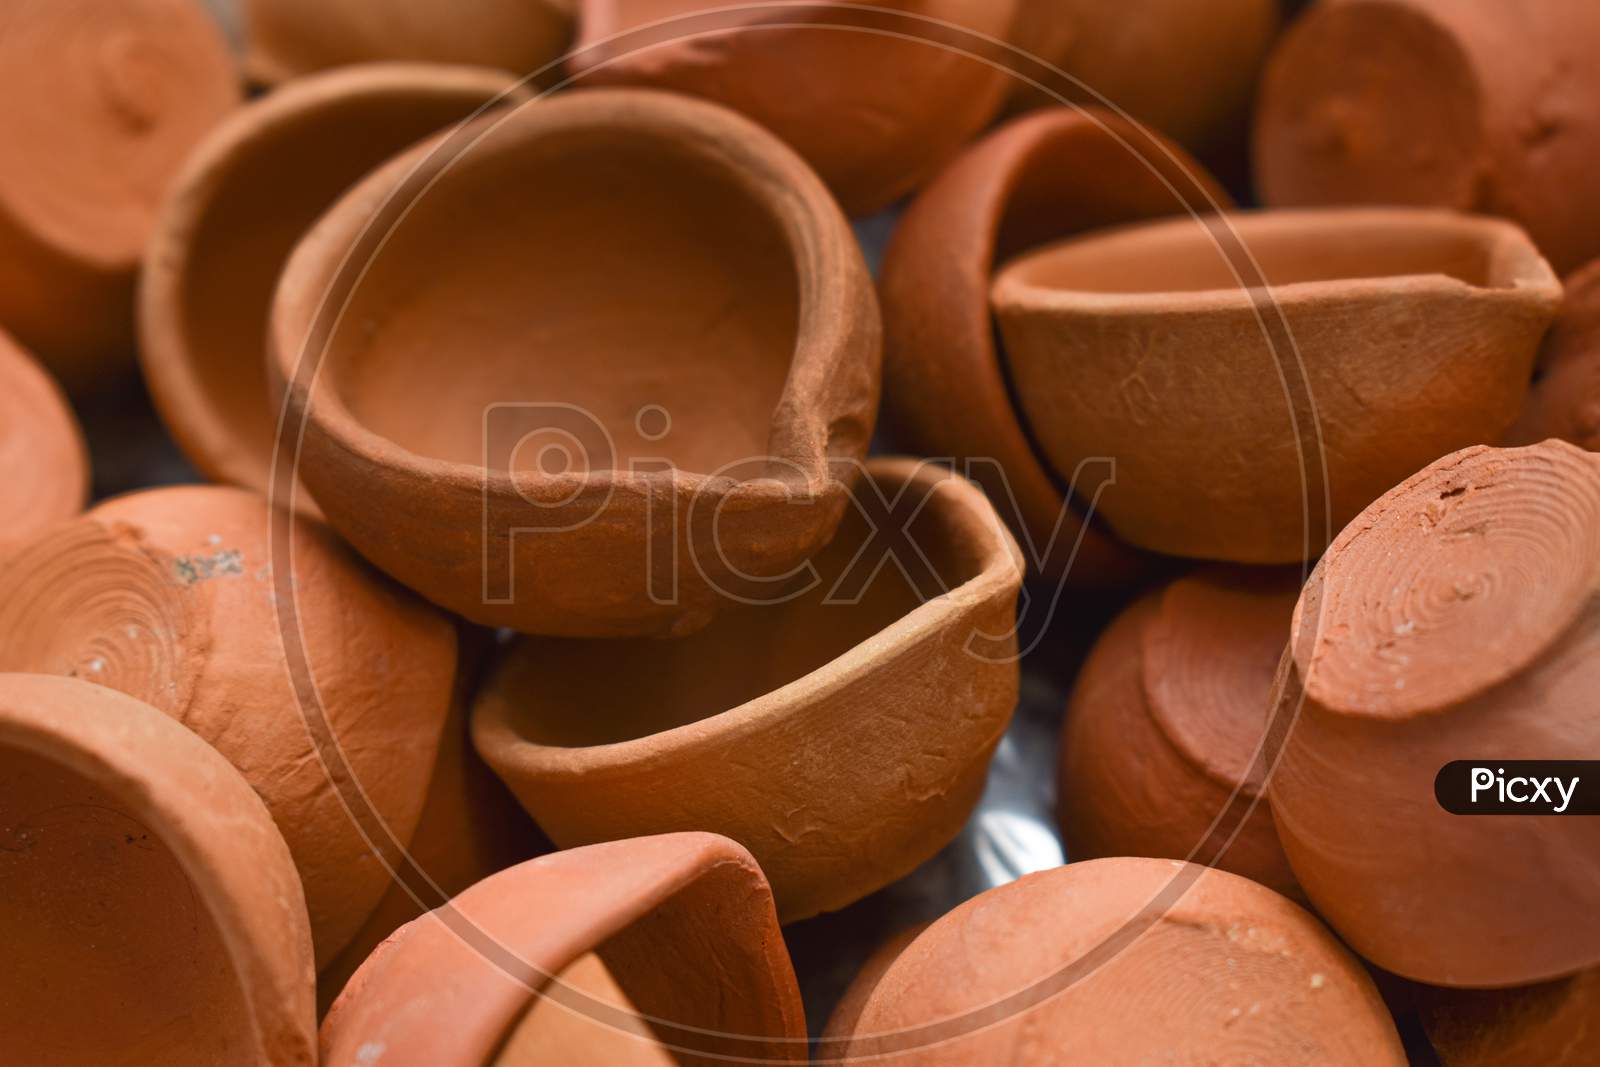 Heap Of Indian Clay Diyas Or Oil Lamp For Diwali Festival .Closeup Shot For Background